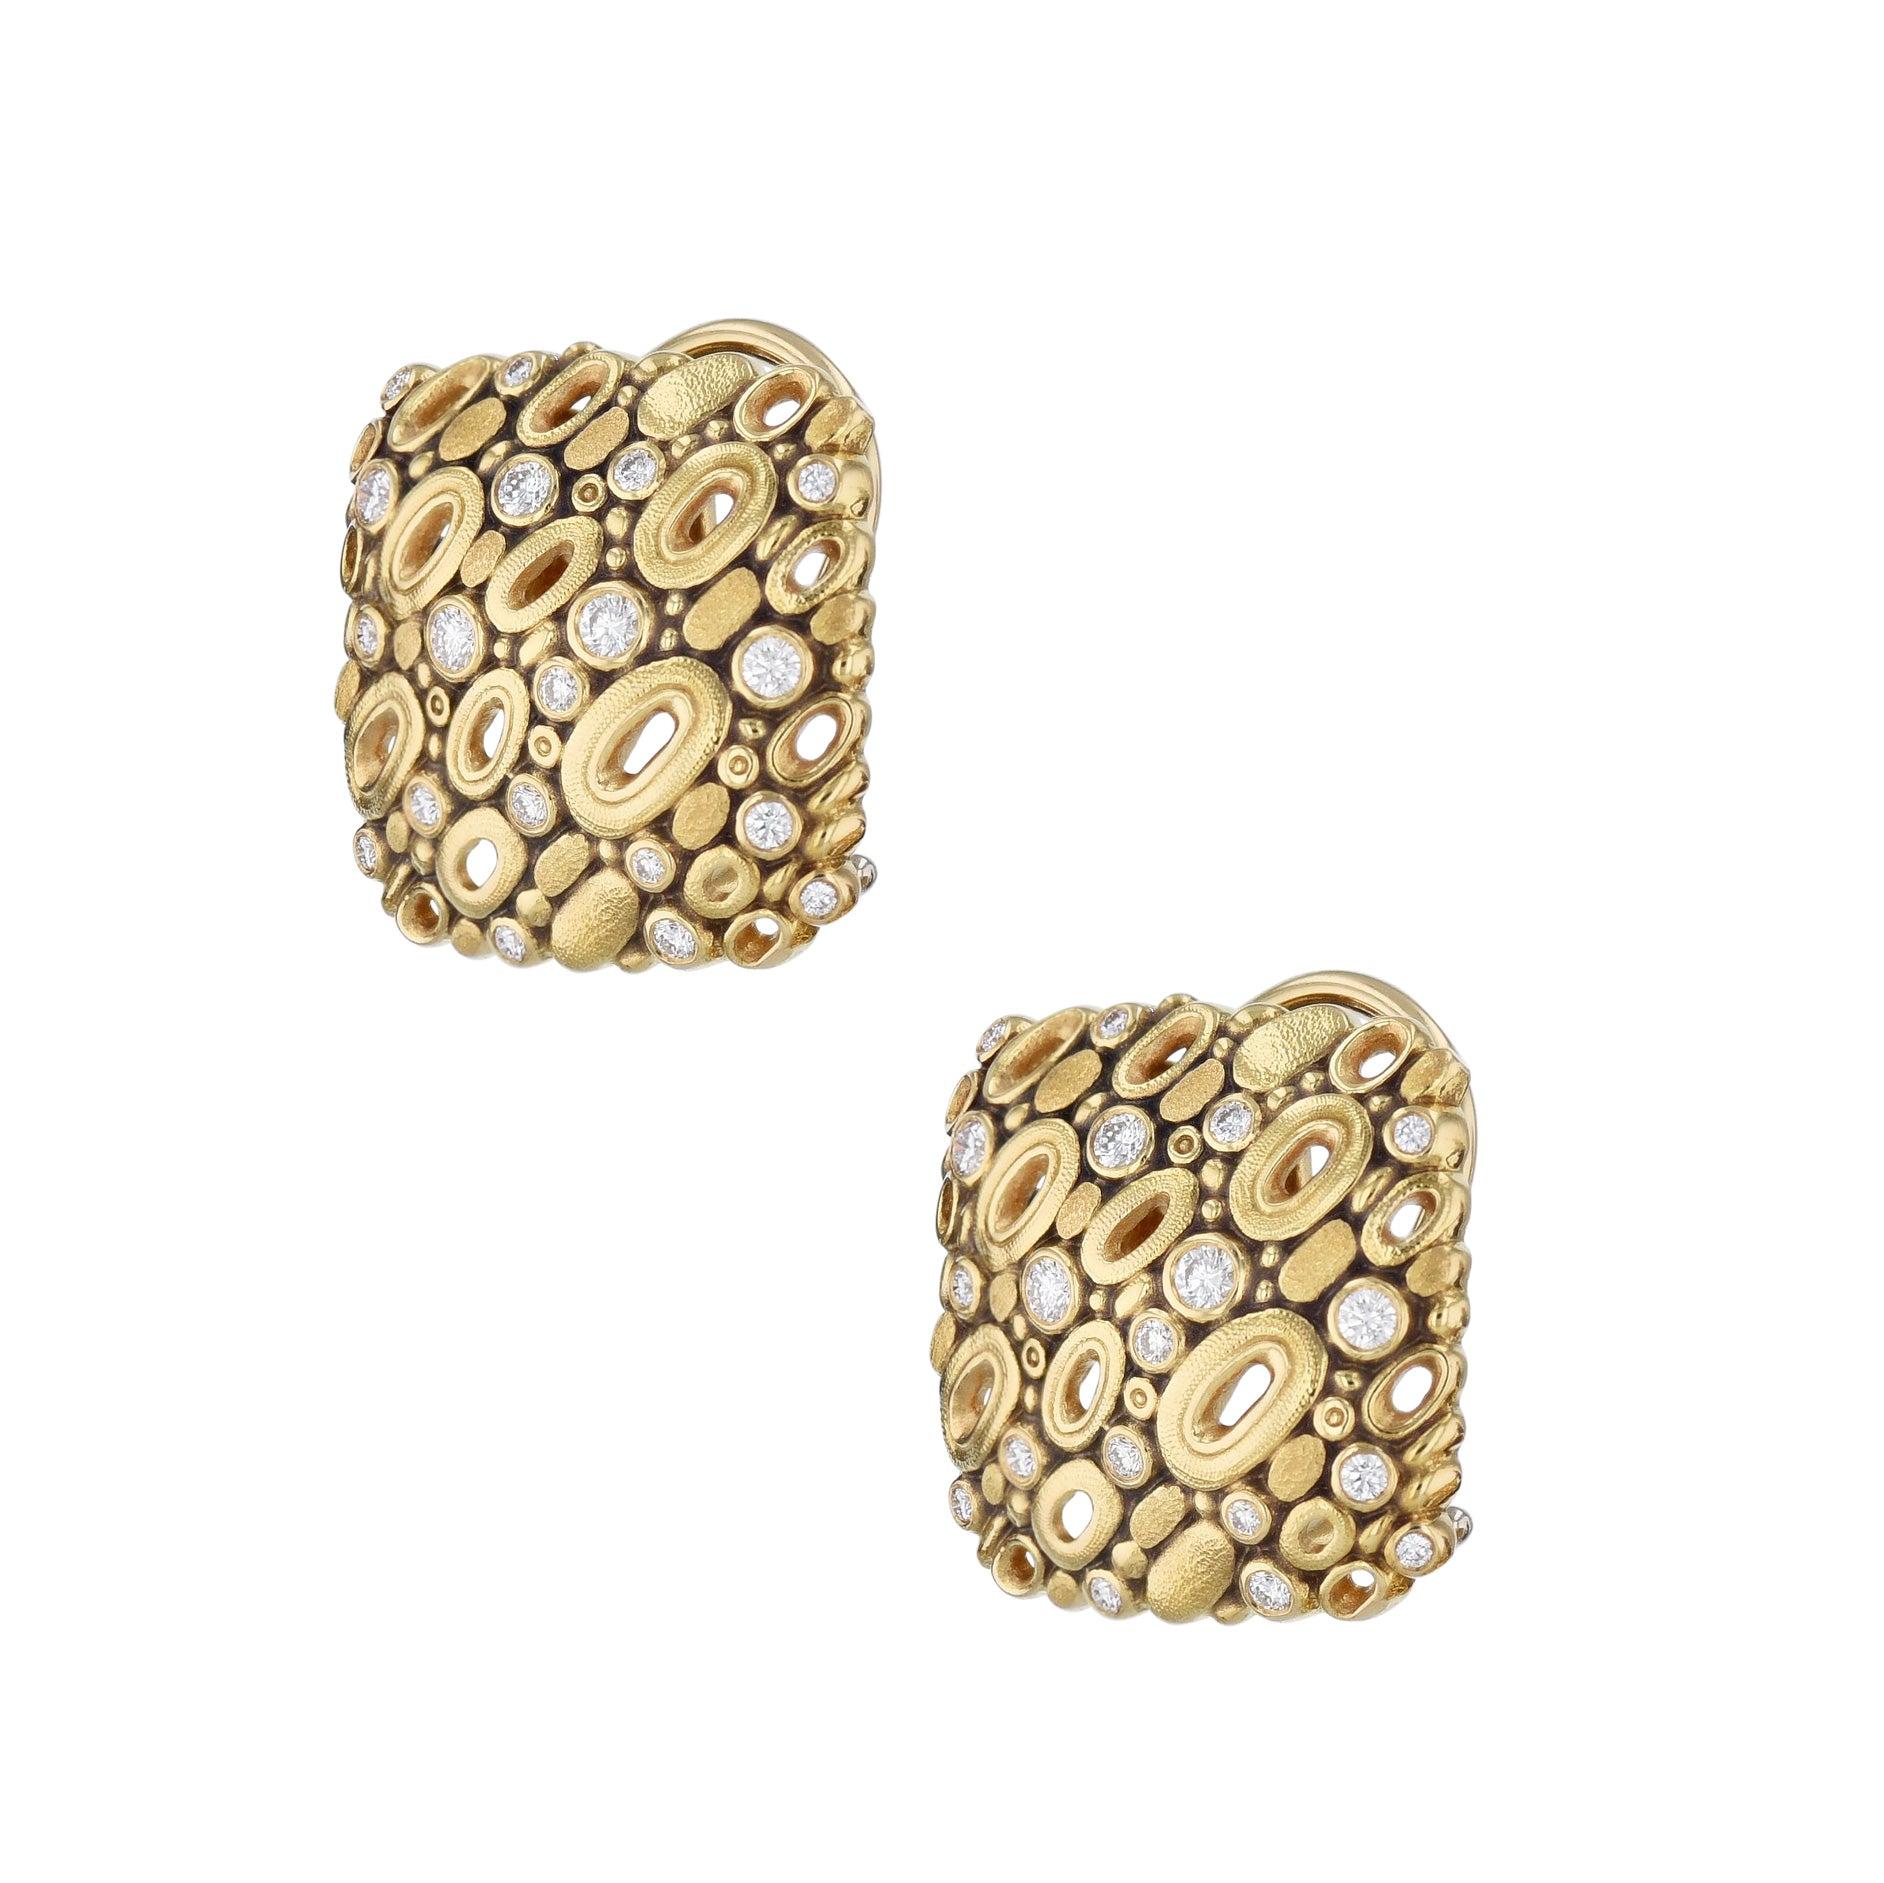 Alex Sepkus' dazzling Flying Oval Square Estate Earrings are crafted with 18k Yellow Gold and 38 beautiful Diamonds. These exquisite earrings bare an eye-catching Alex Sepkus Flying Oval design, making it a timeless classic. Make a statement with